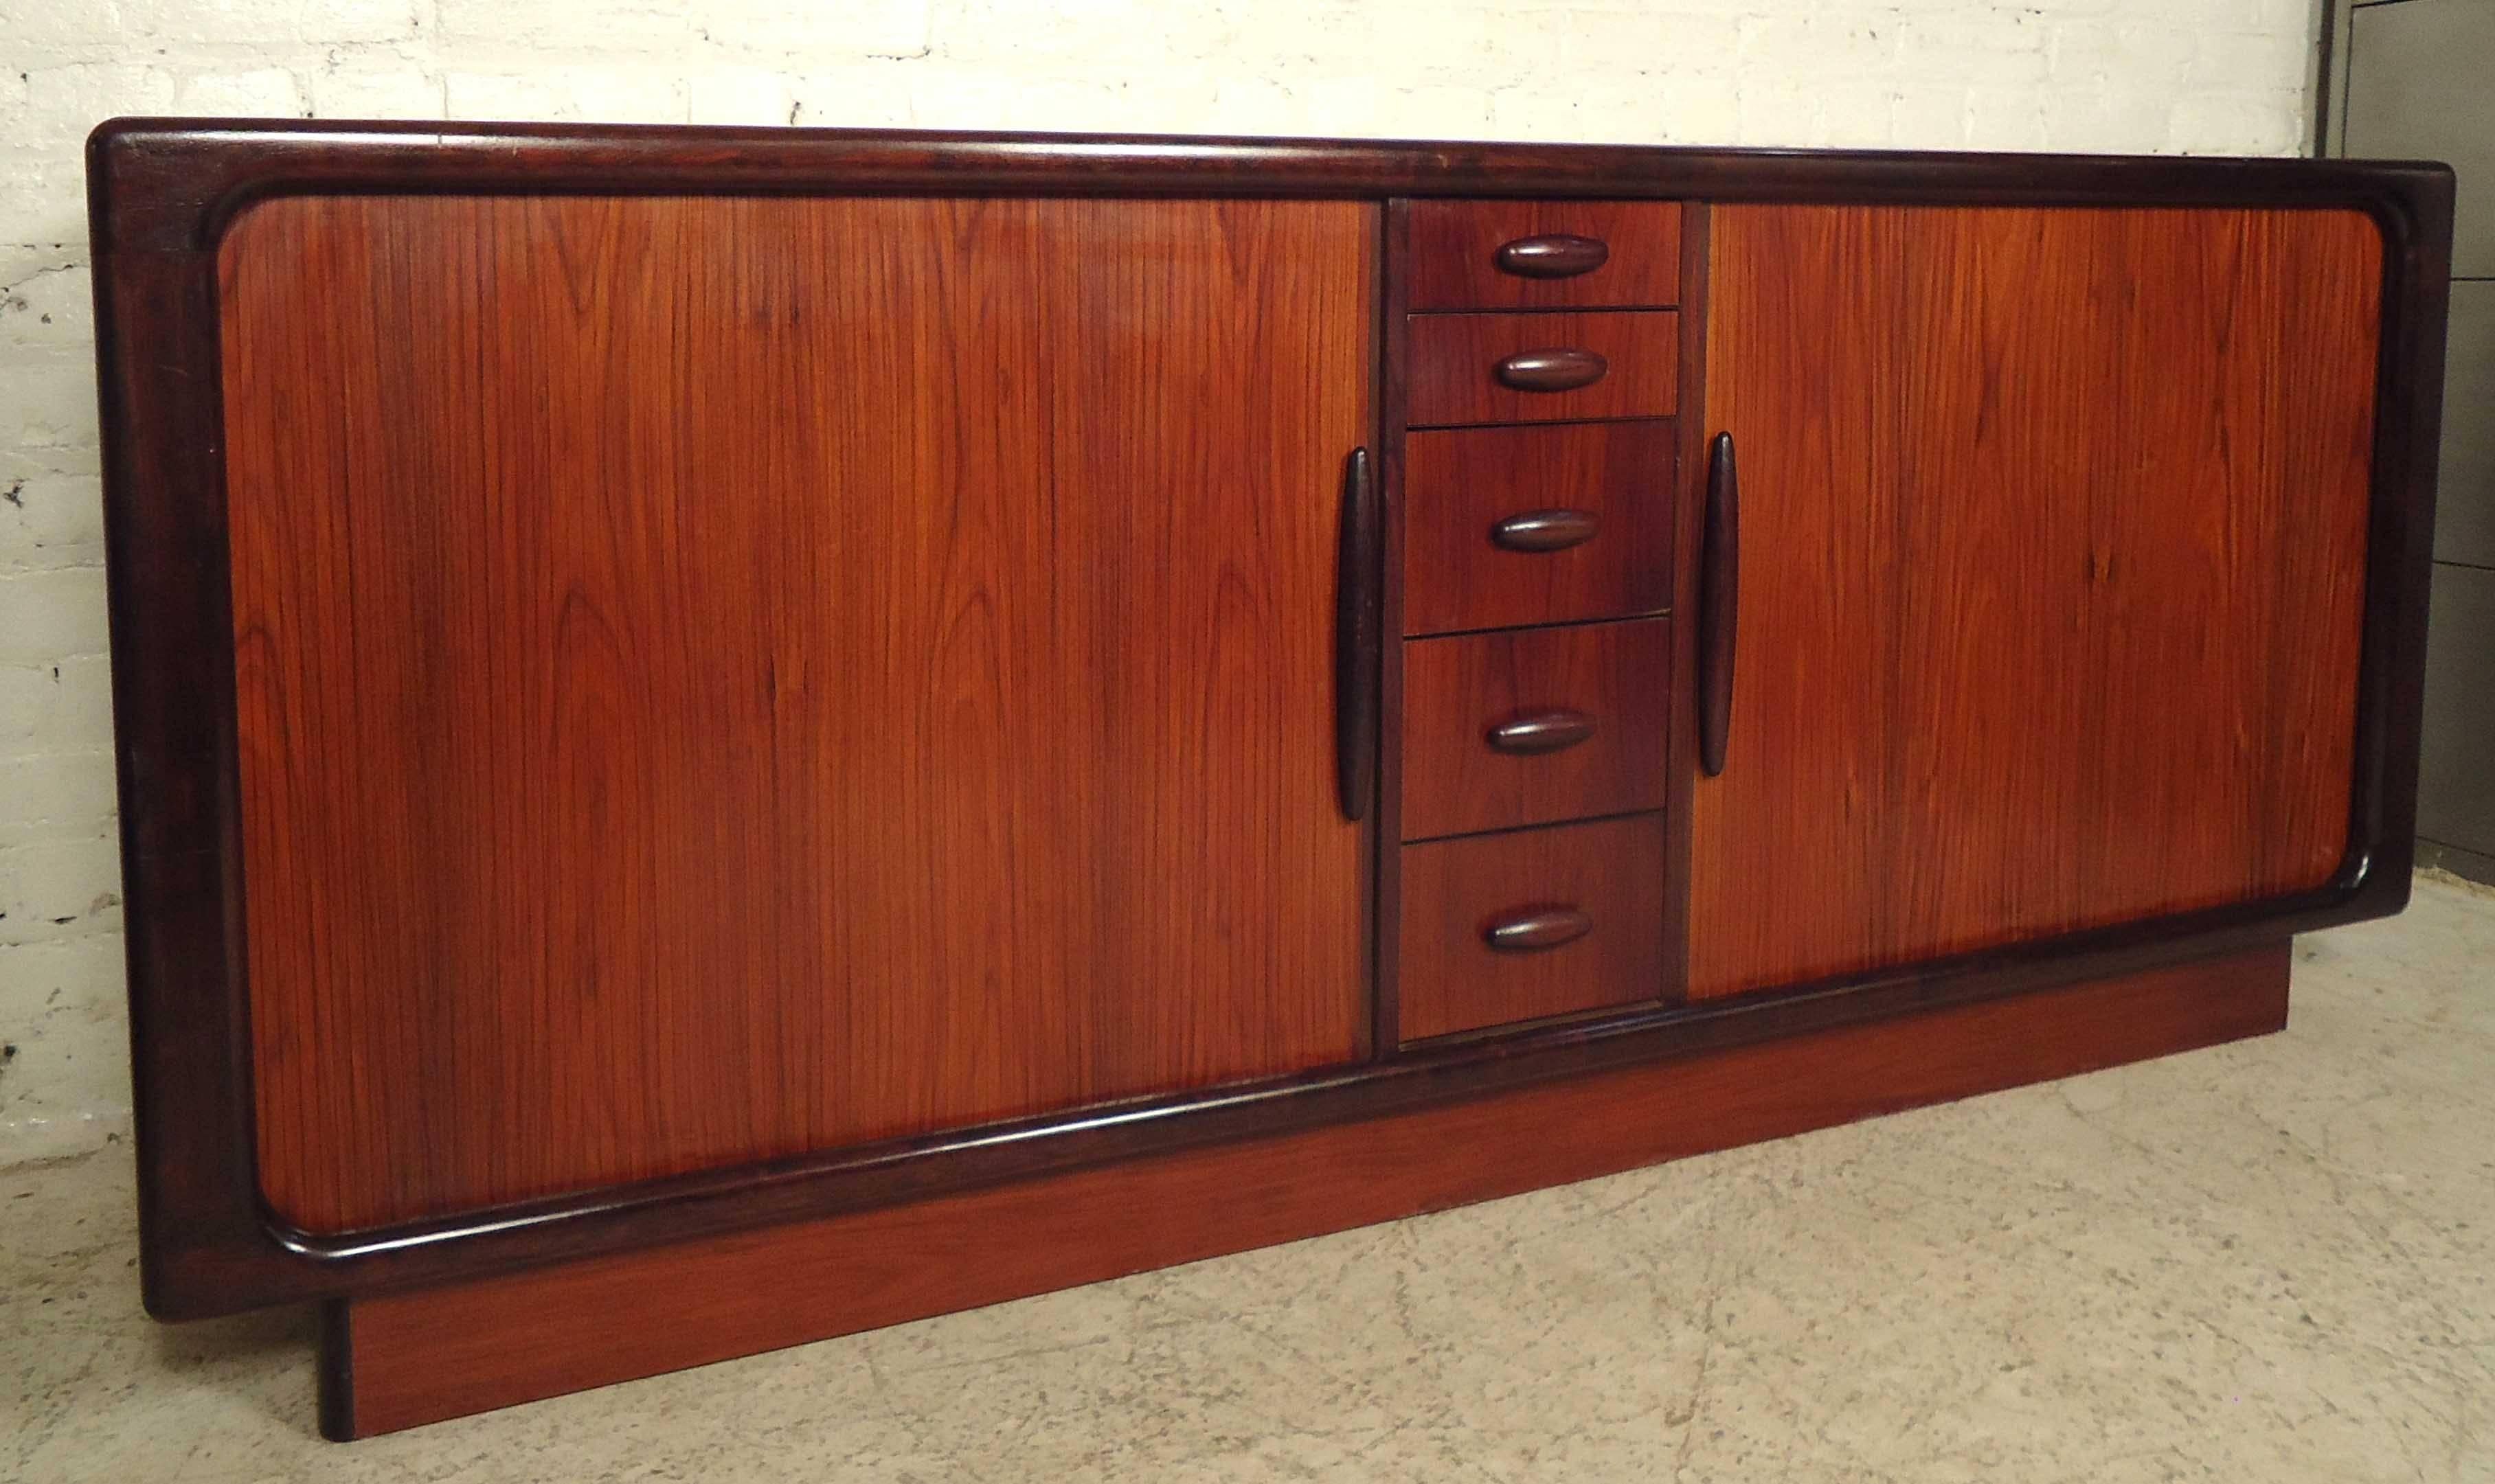 Unique vintage-modern server made of rich rosewood grain, features three large drawers, one shelving unit and a spacious compartment all behind a set of tambour doors. Including five smaller drawers in center with beautifully sculpted